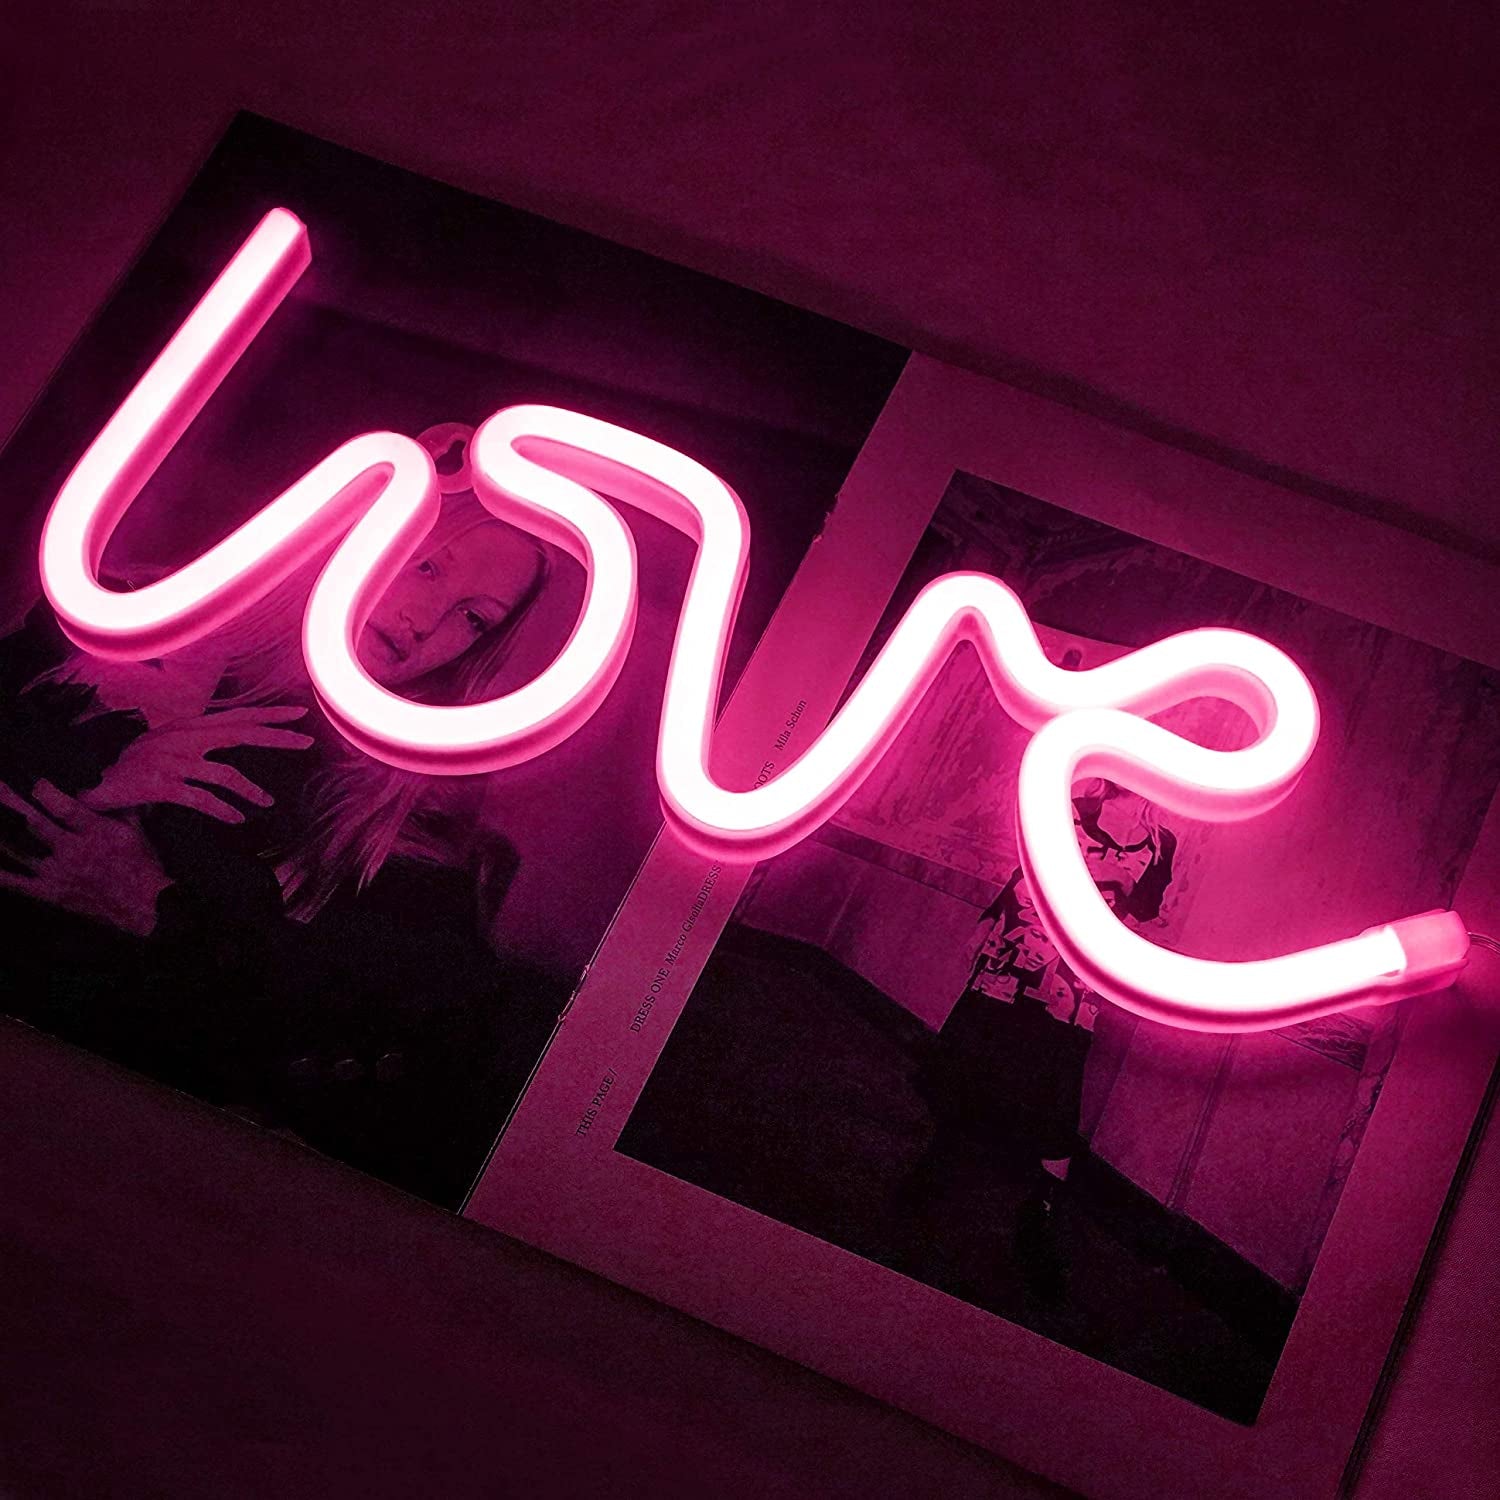 Love LED Neon Light, Usb/Battery Powered Heart Shaped Neon Sign Lamp, Decorative Night Light Wall Decor for Bedroom Living Room Kids Room Wedding Party Christmas (Love-P)